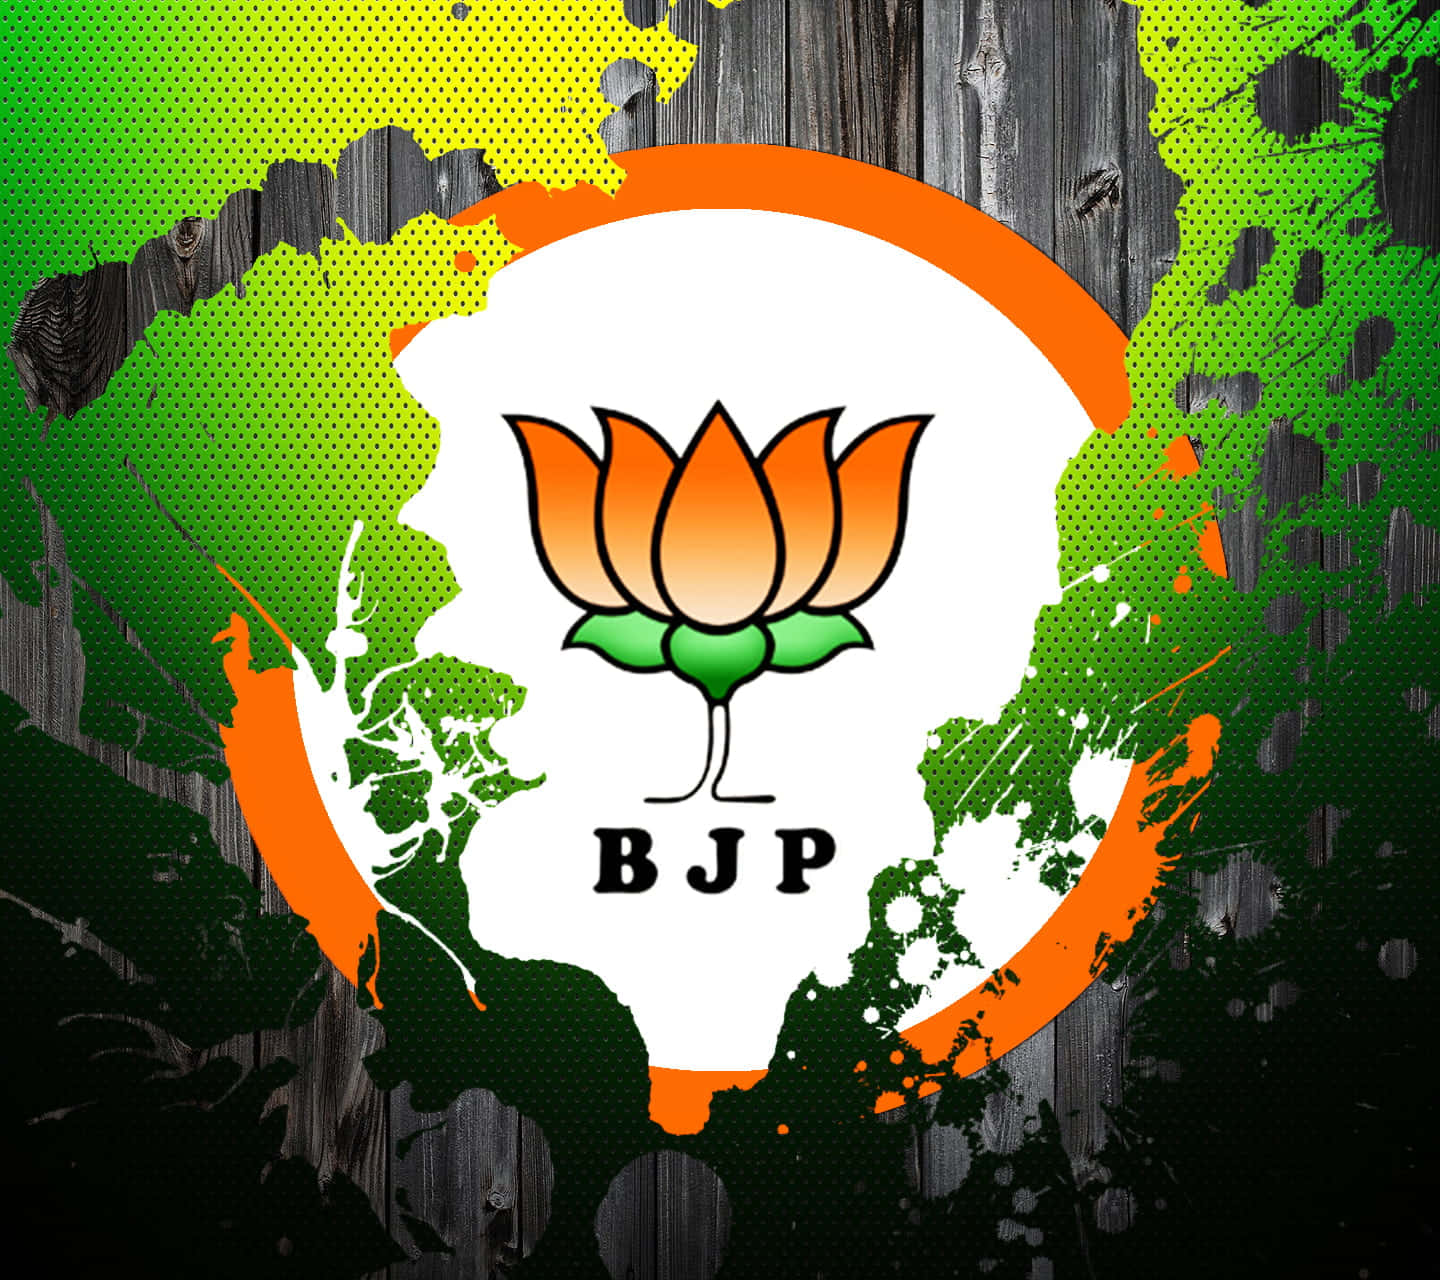 Spread the message of progress and development being delivered to India by the BJP